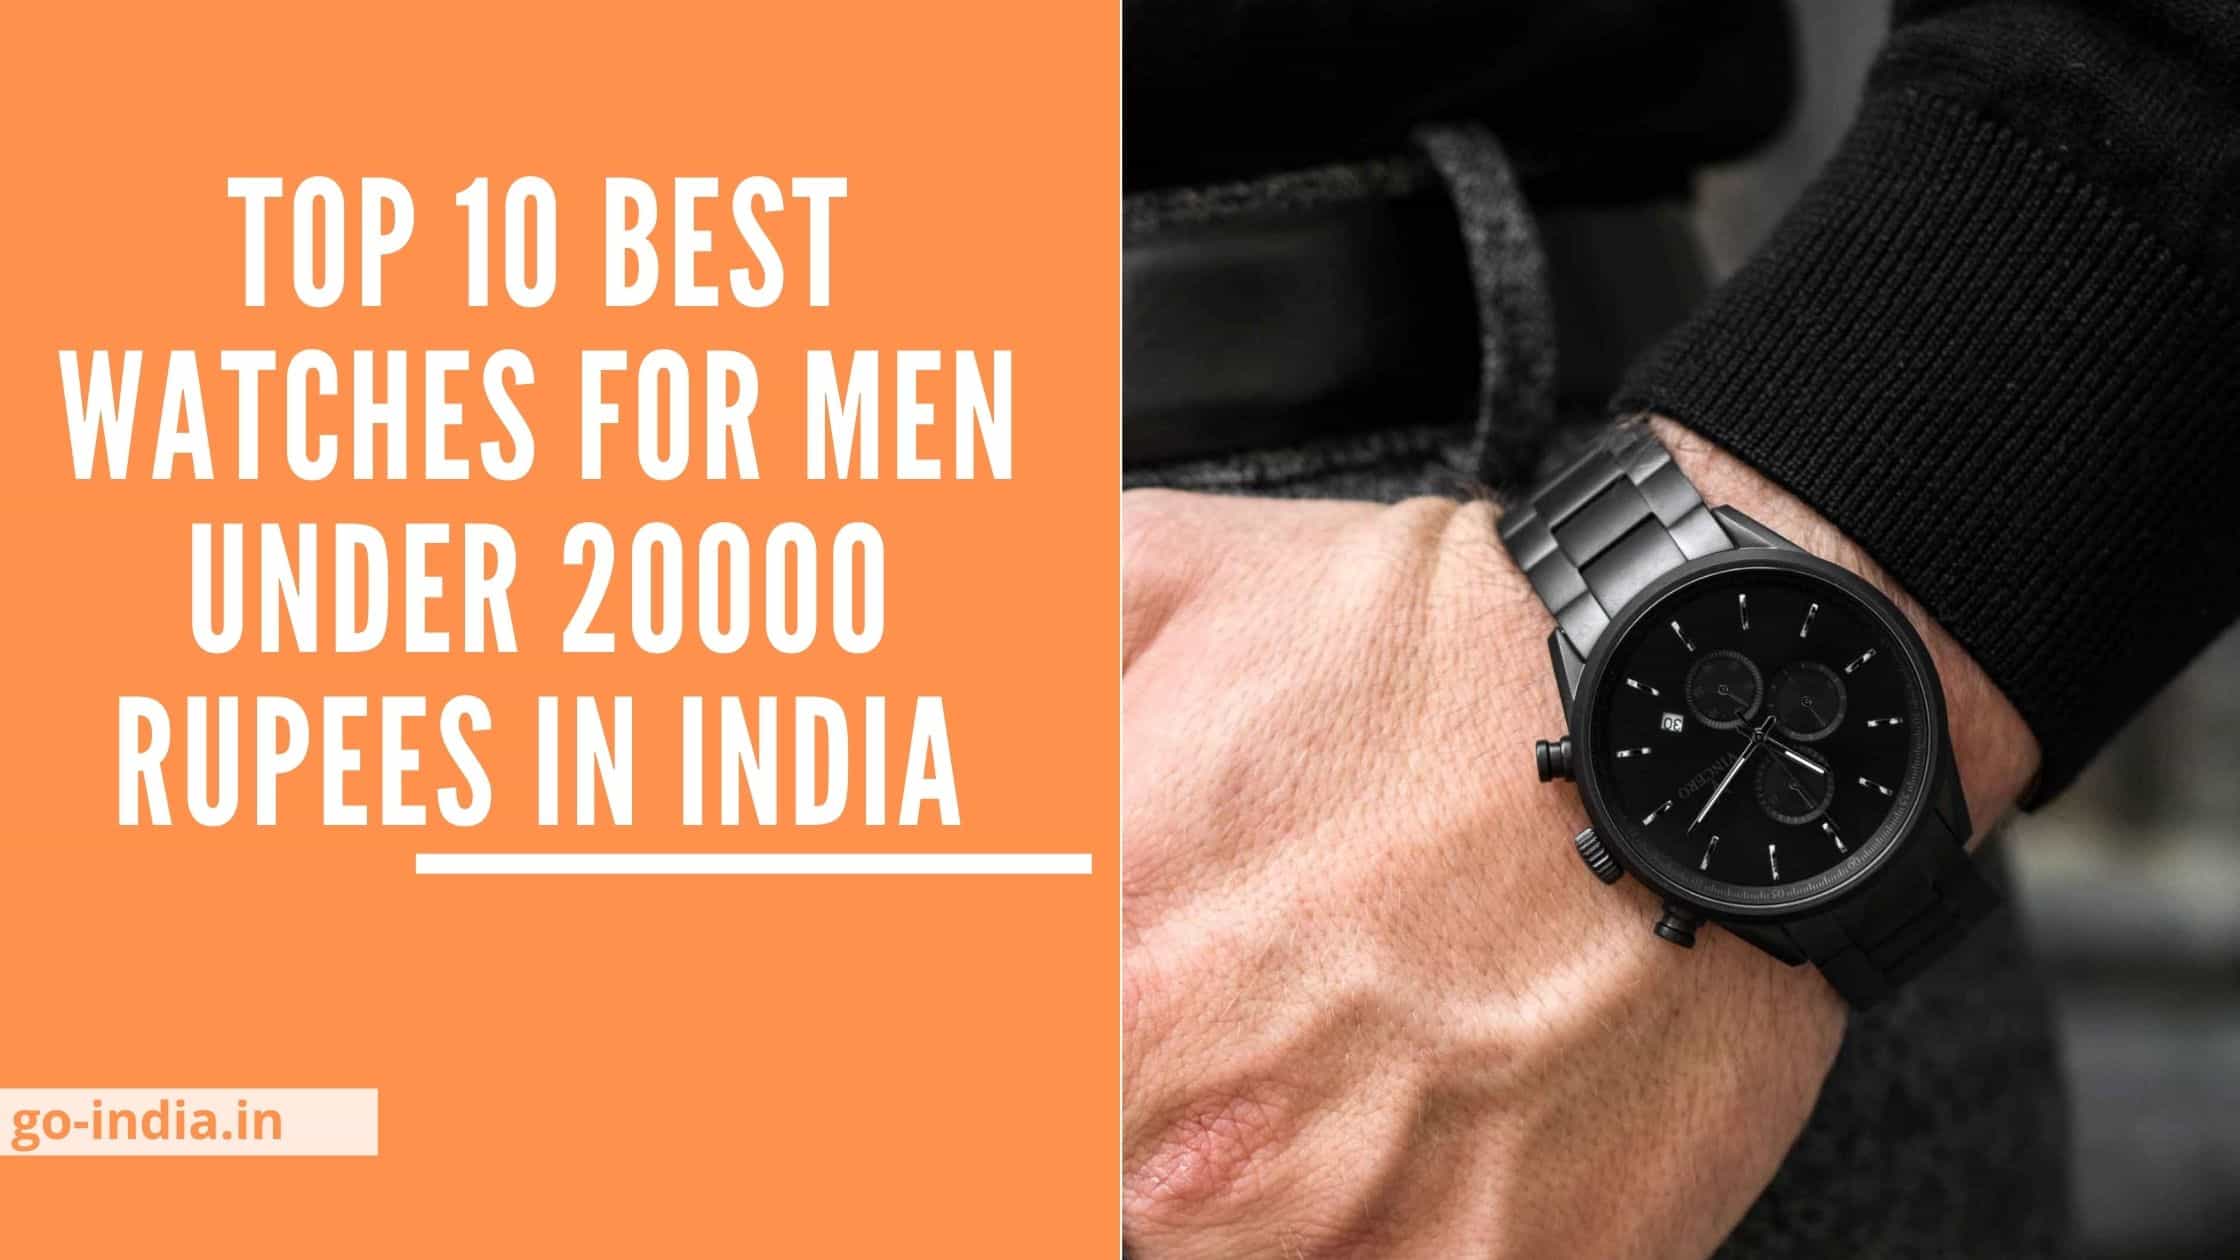 Top 10 Best Watches For Men Under 20000 Rupees in India